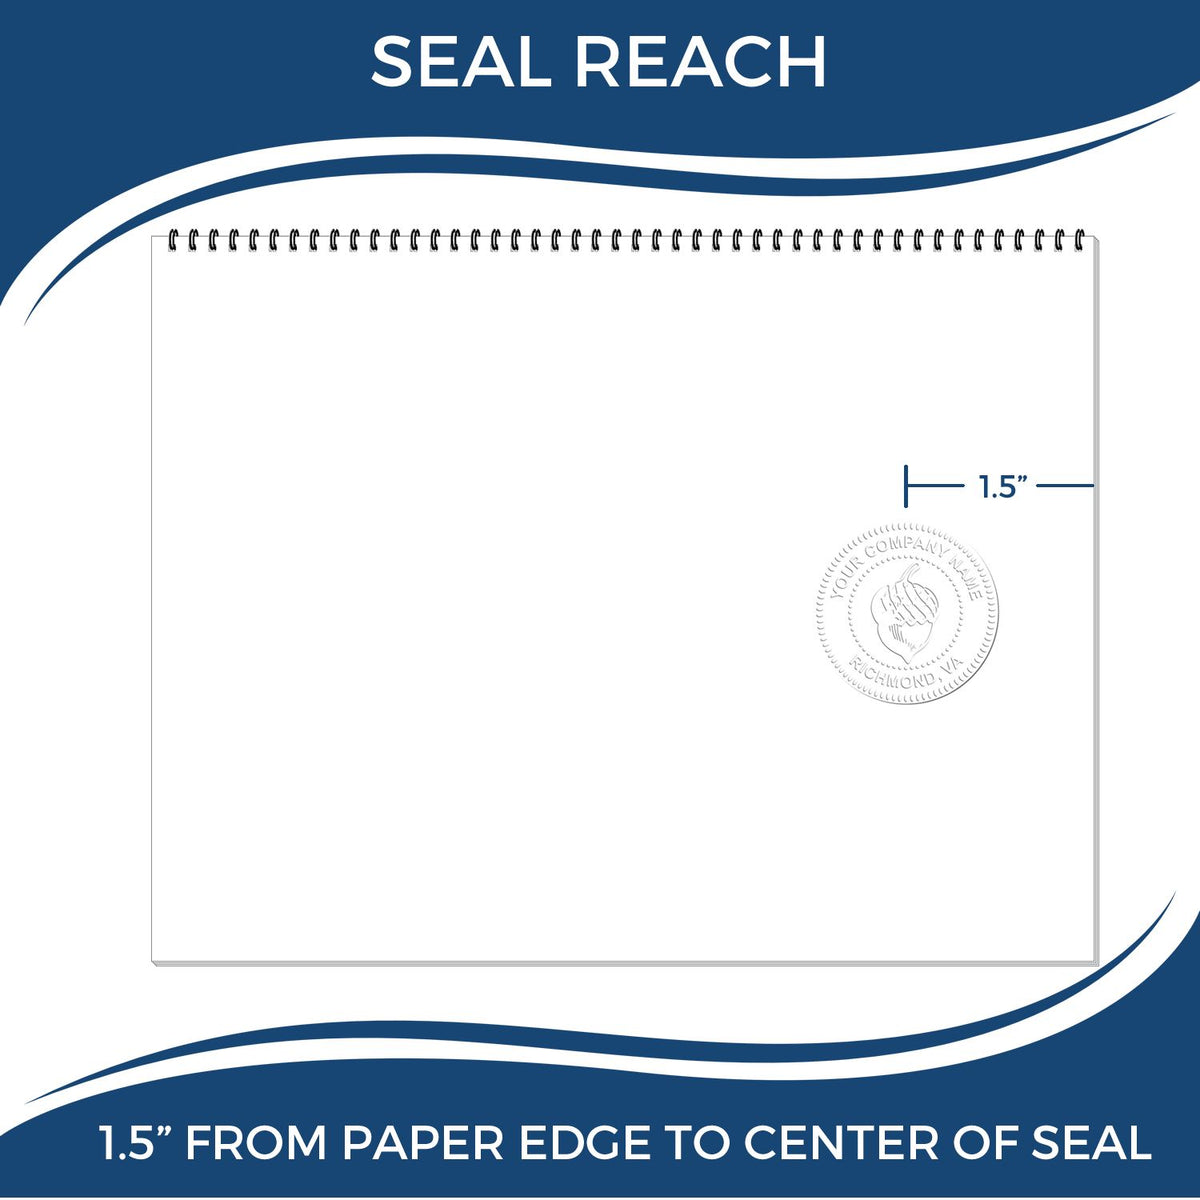 An infographic showing the seal reach which is represented by a ruler and a miniature seal image of the Handheld New Jersey Professional Geologist Embosser